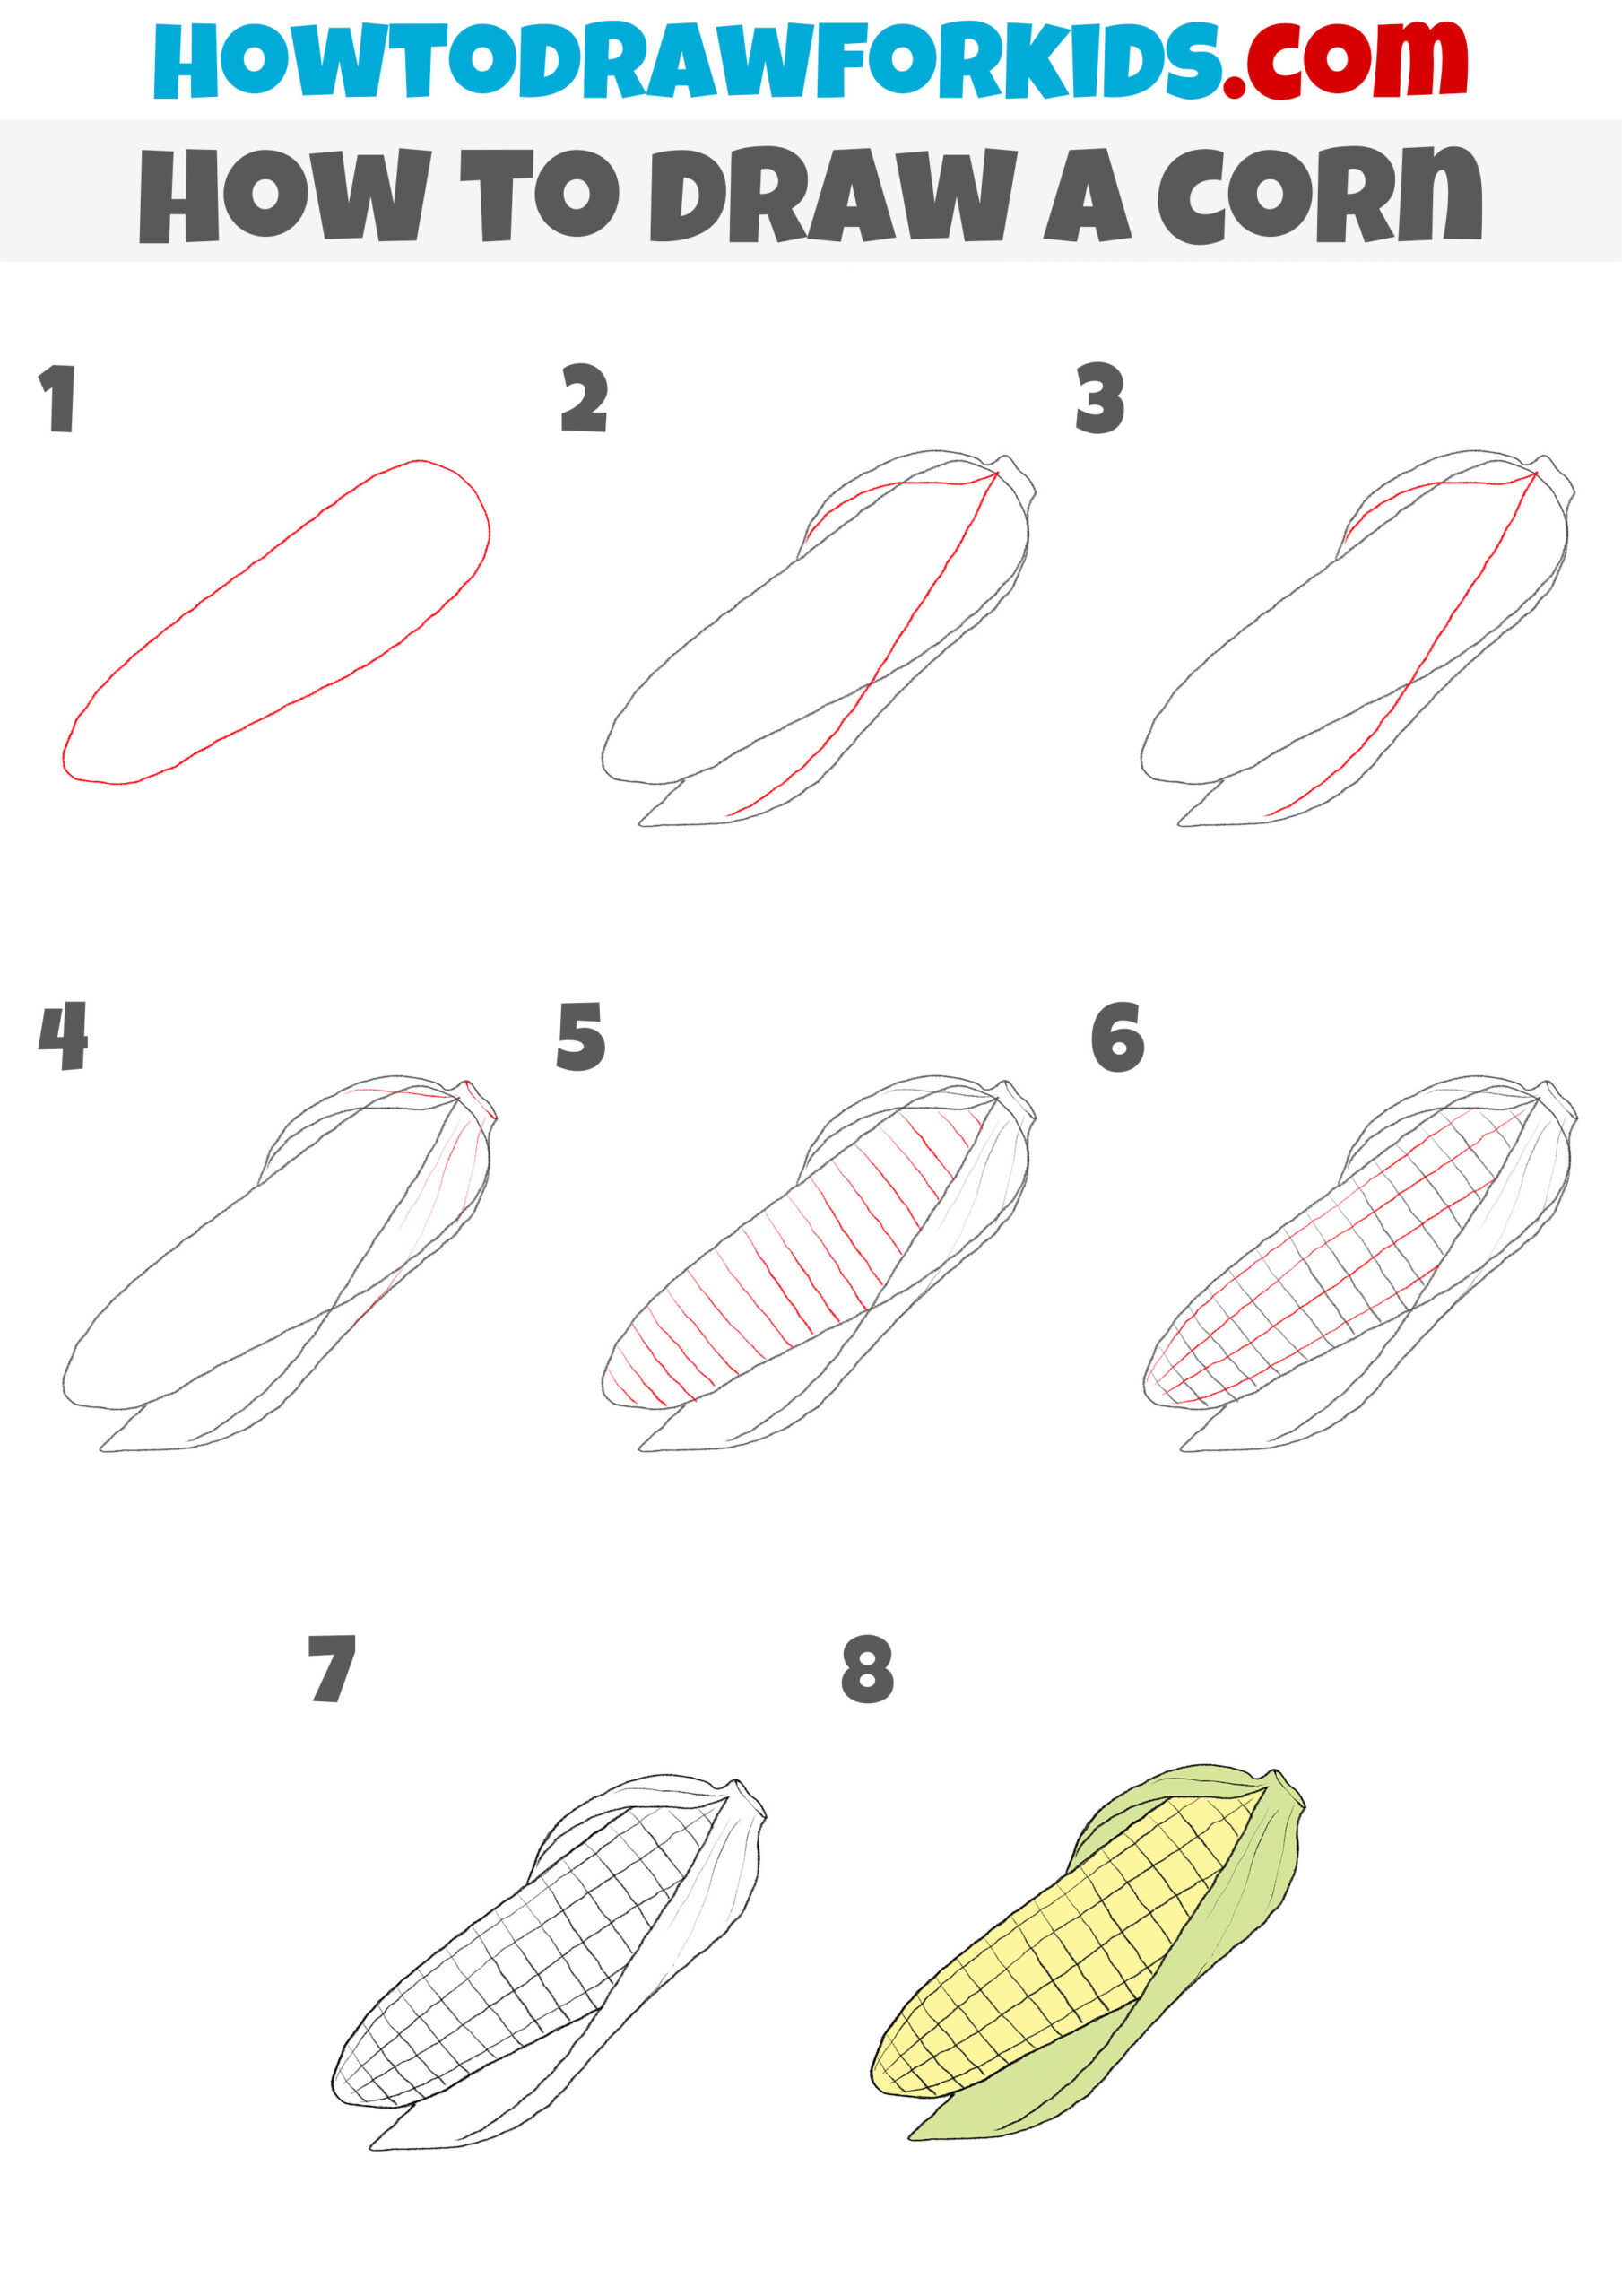 how to draw a corn step by step